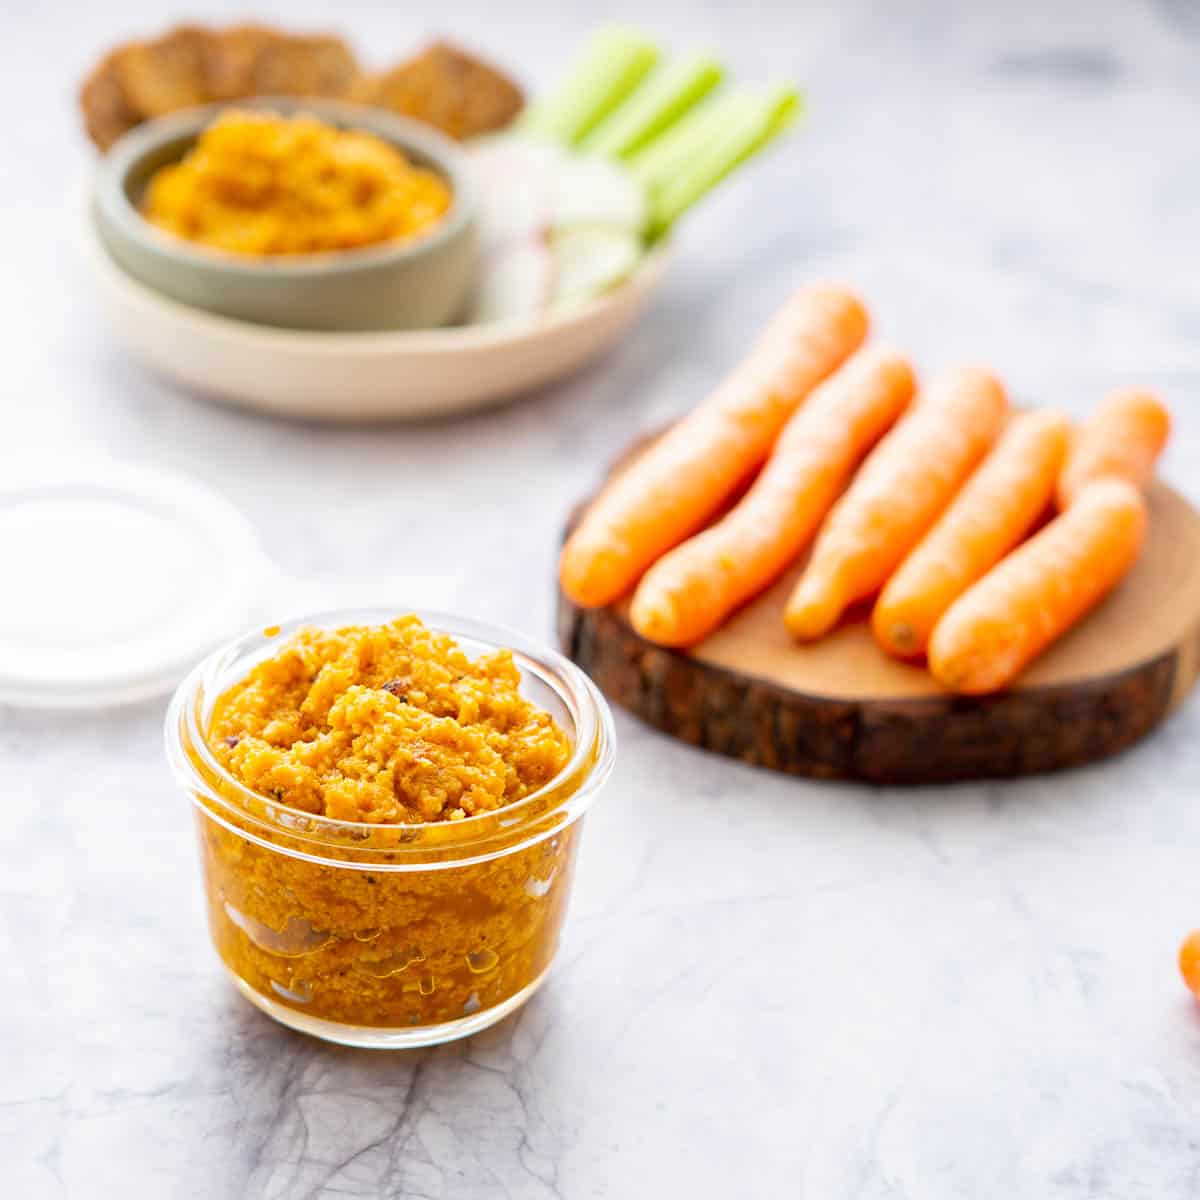 A small glass jar filled with orange pesto, on a bench with a snack platter and loose carrots.